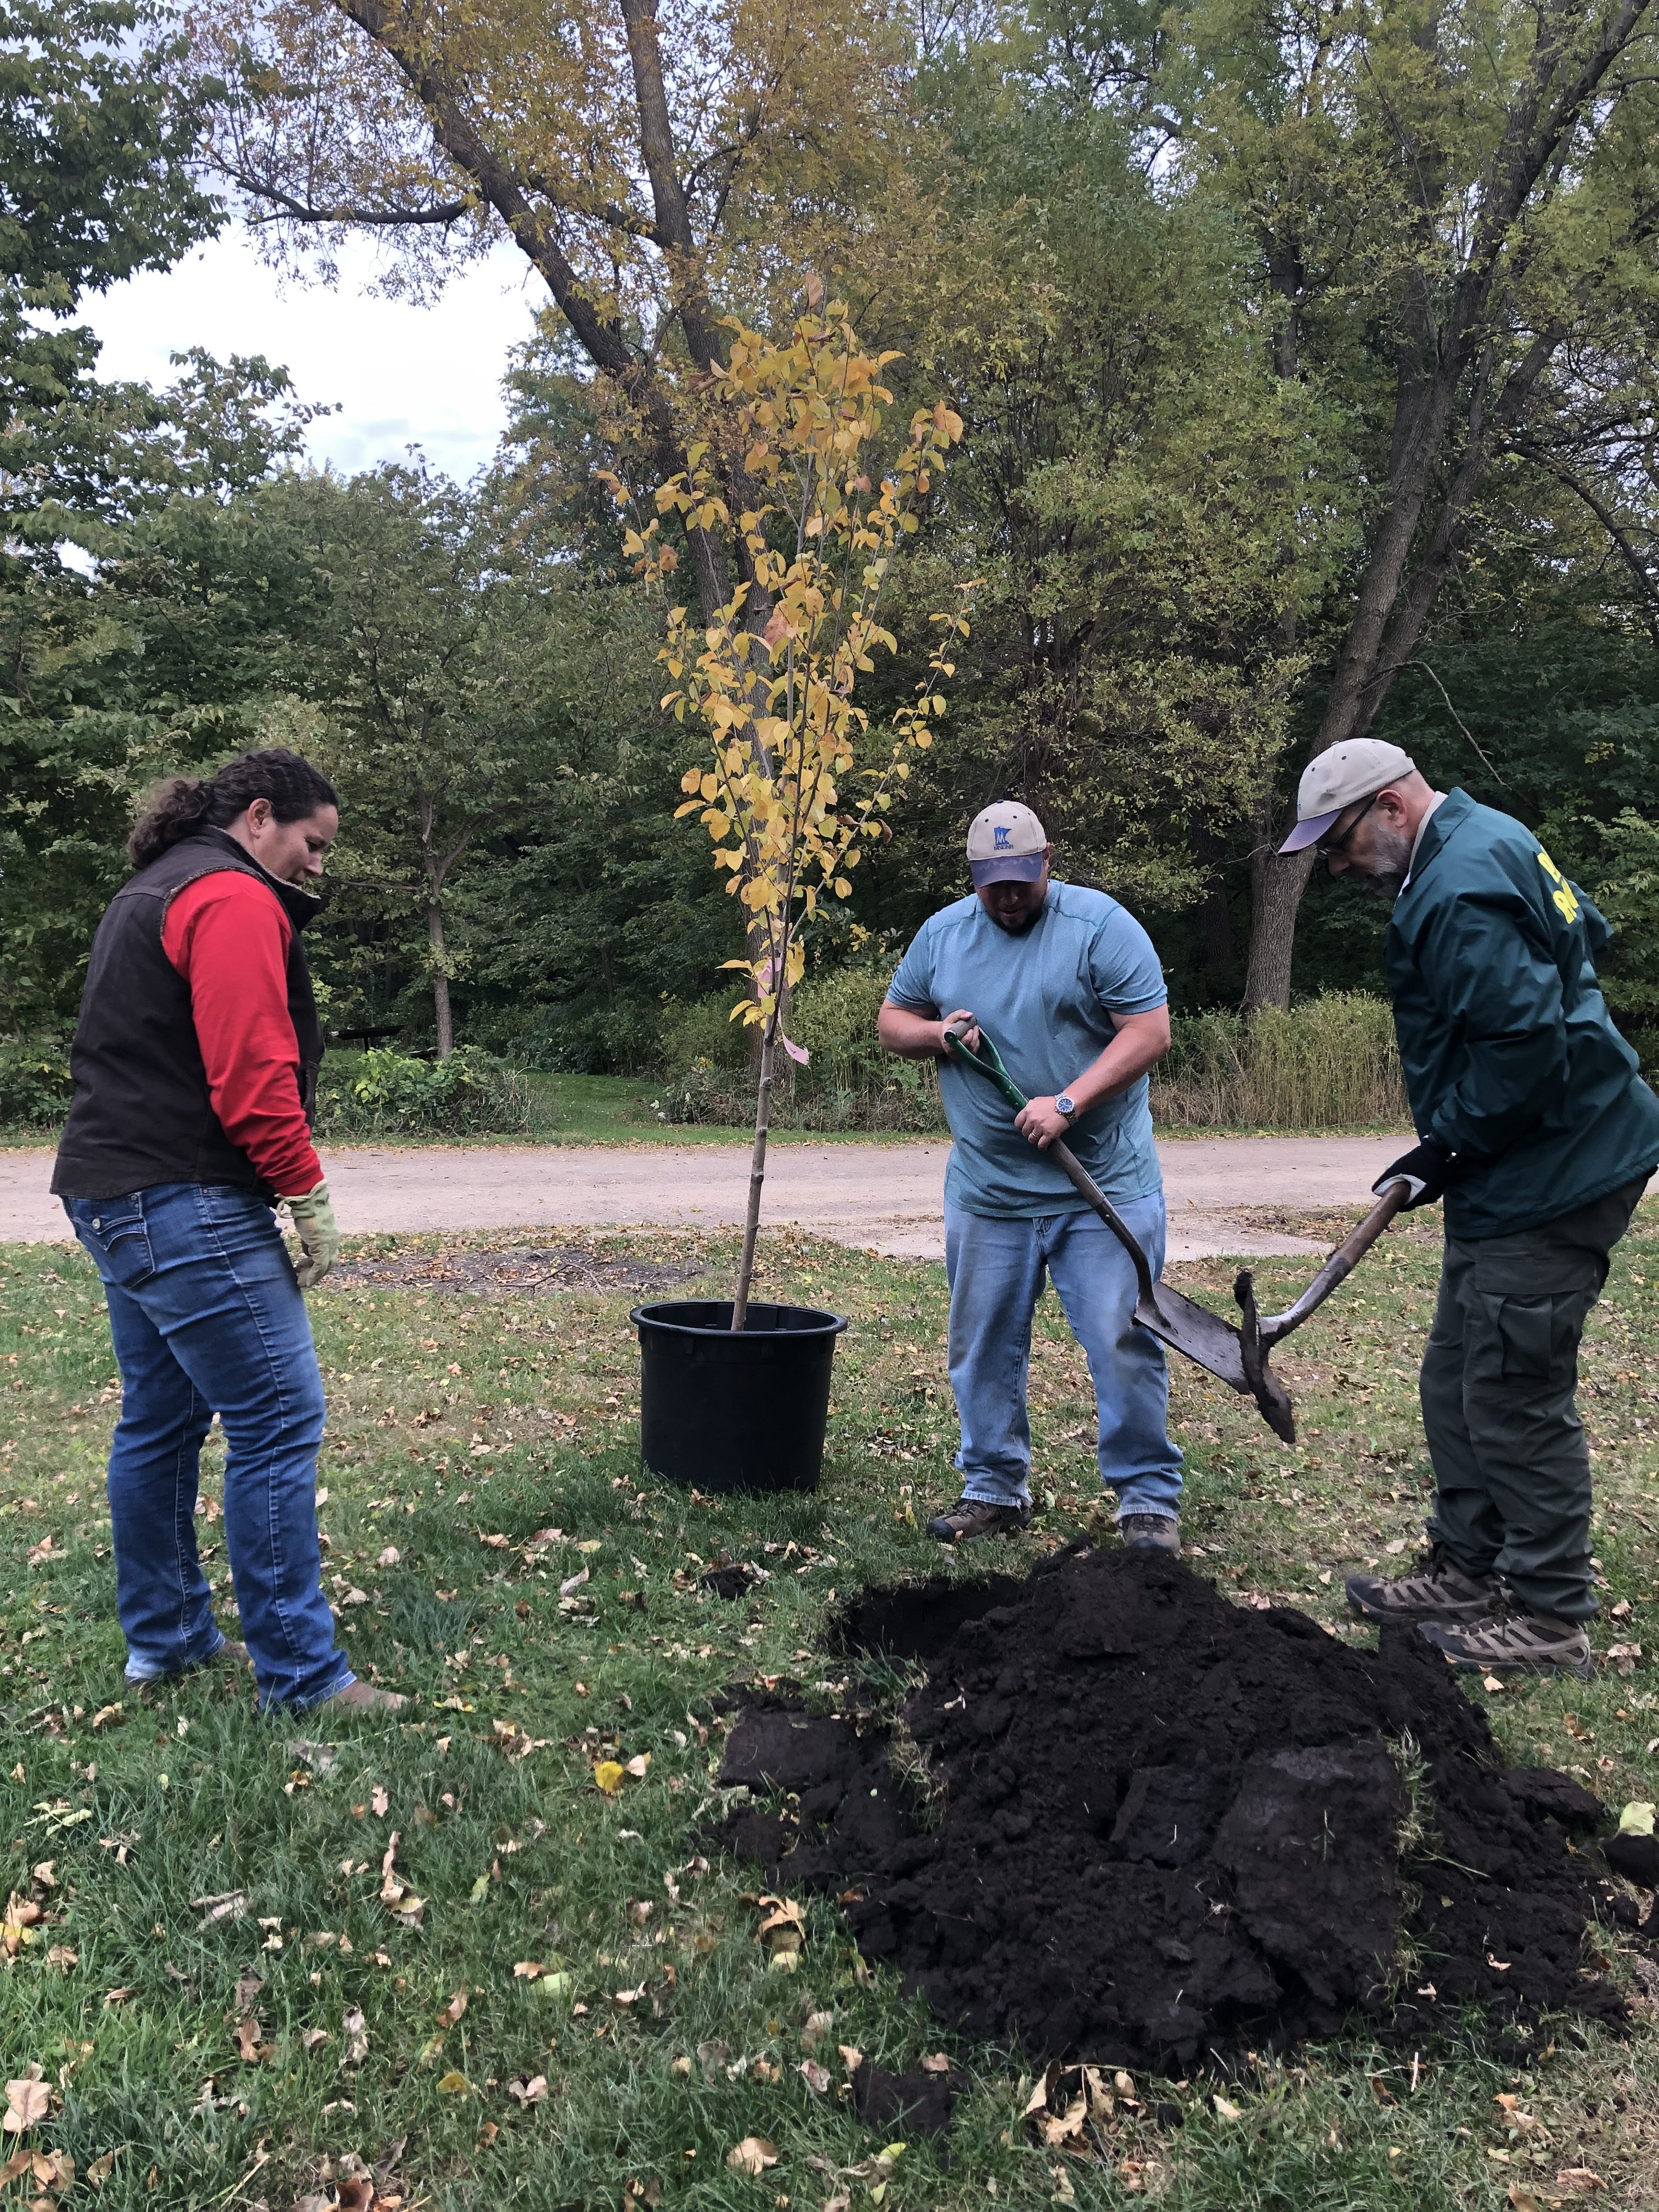 volunteers and a park staff member use shovels to plant a tree